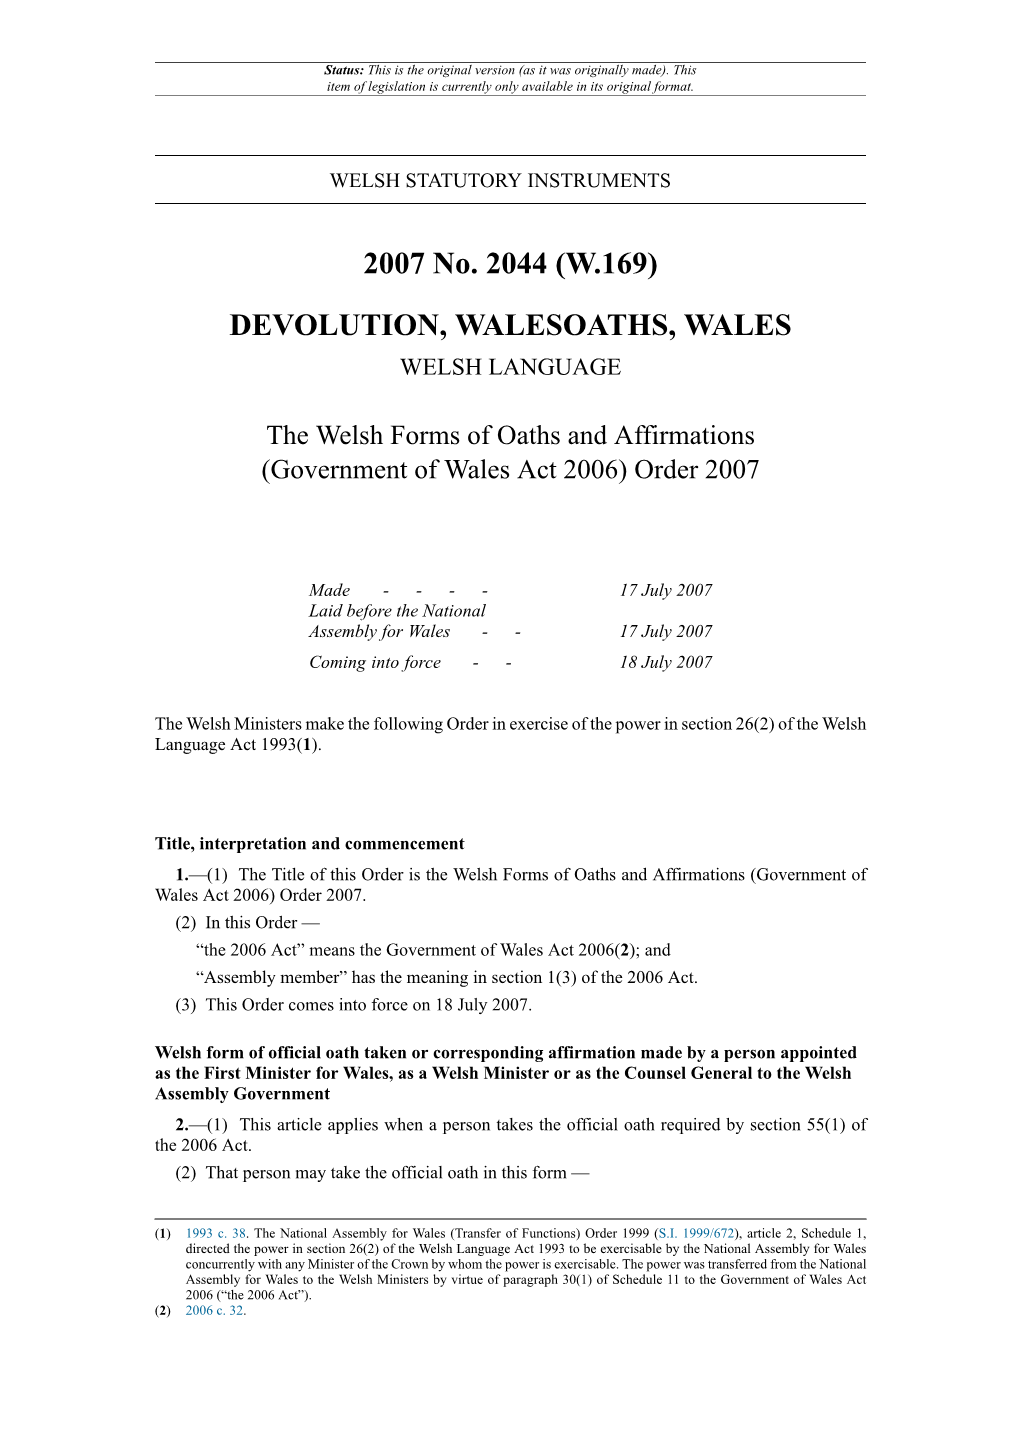 Government of Wales Act 2006) Order 2007